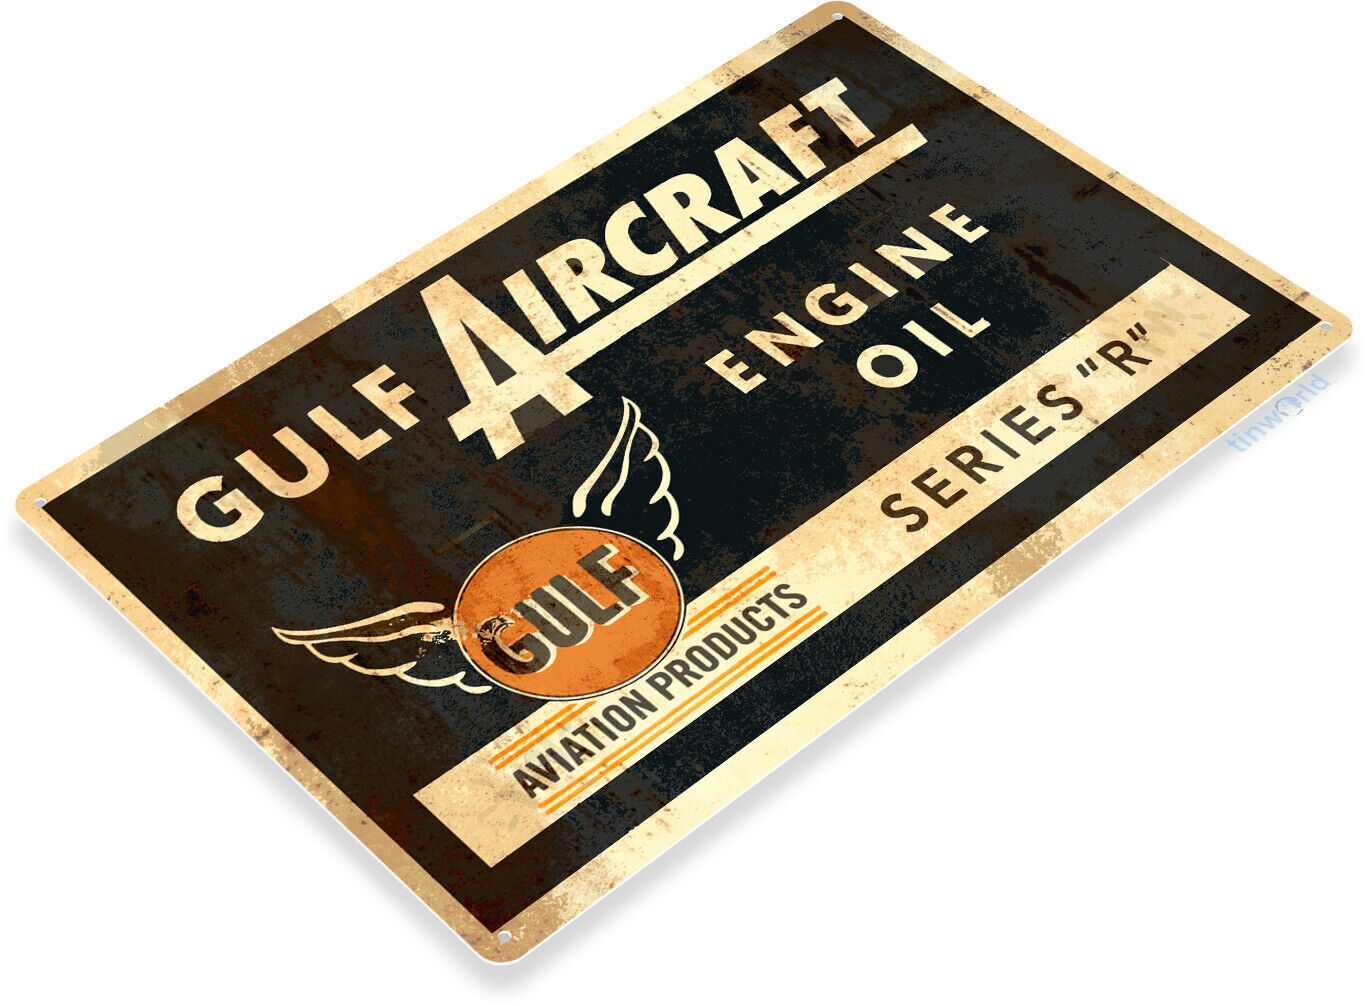 Gulf Aircraft Engine Oil Aviation Products Pilot Rustic Metal Sign 8 x 11 Inches